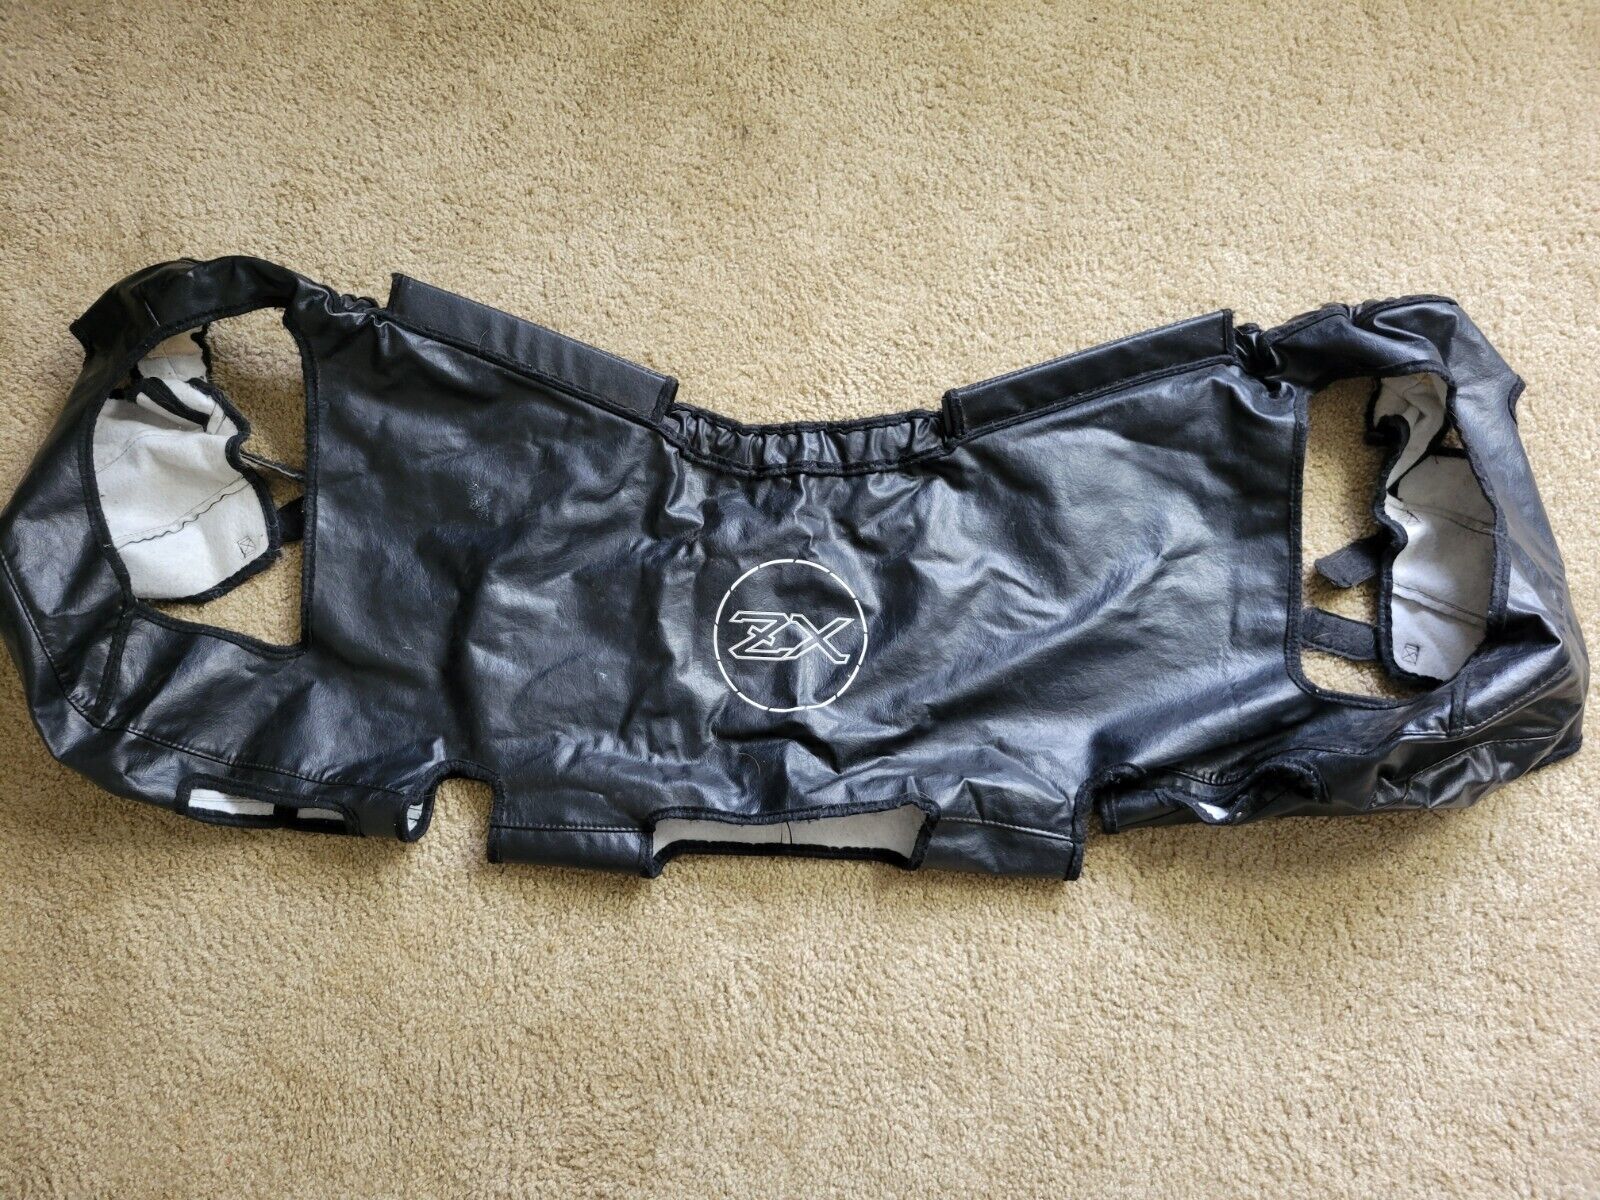 Datsun 280zx Leather Bra Front Cover Vintage 